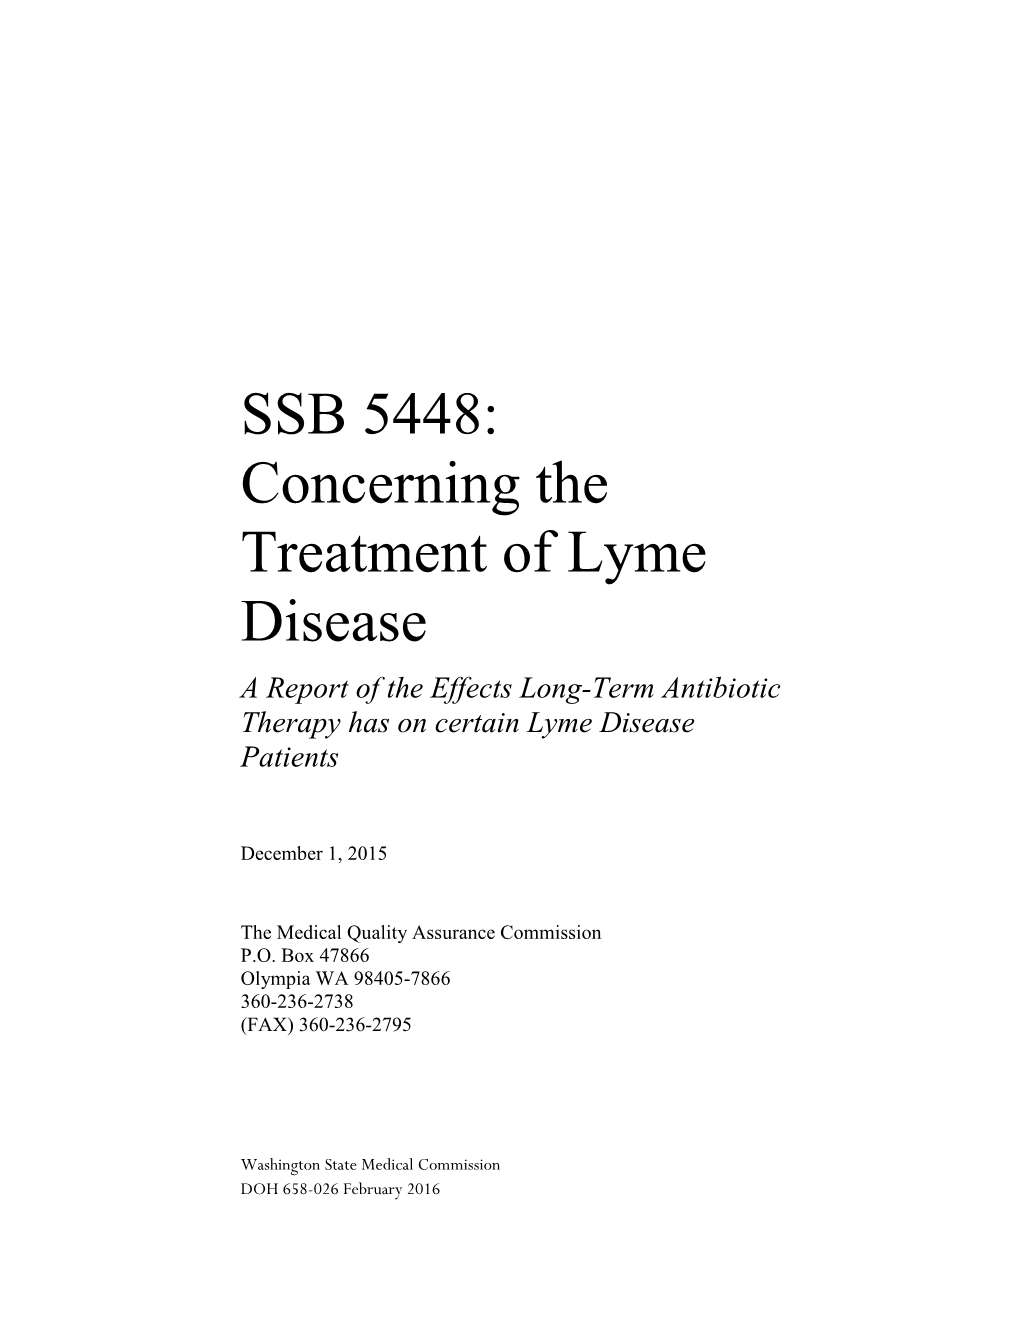 SSB 5448 : Concerning the Treatment of Lyme Disease